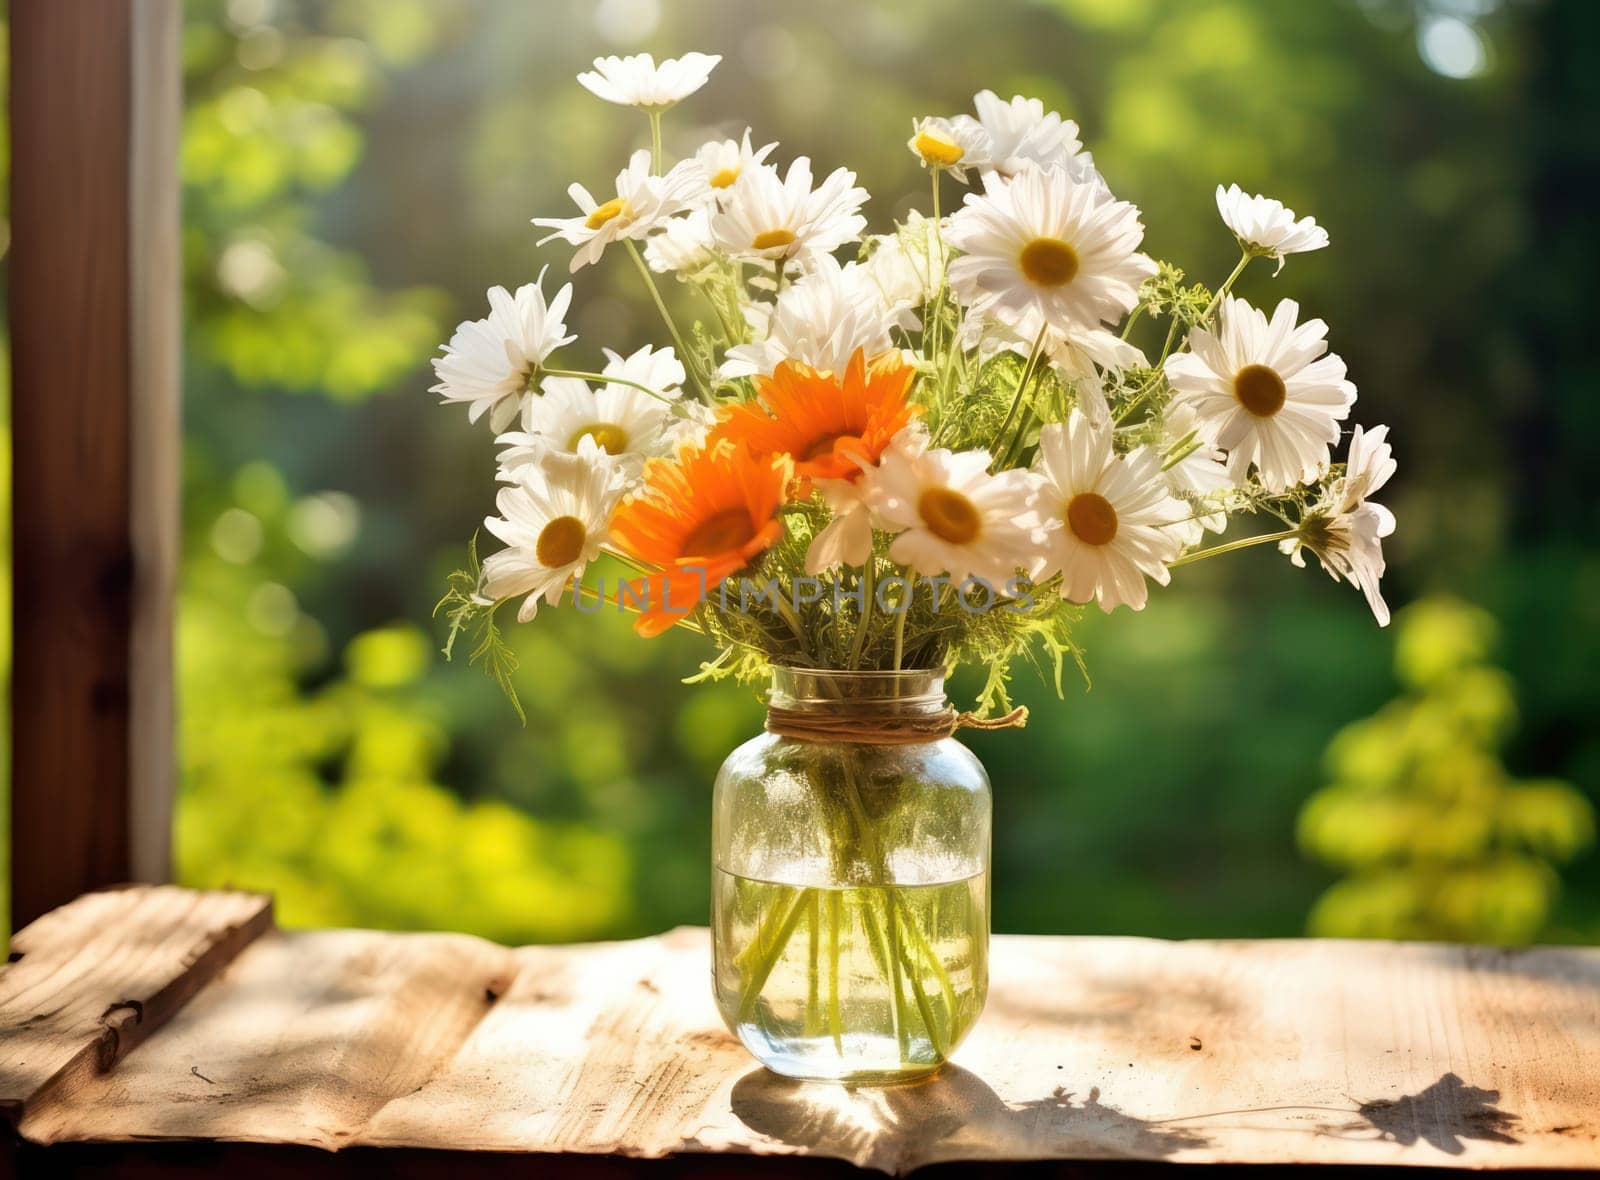 Bouquet of Blooming Daisies: A Refreshing Burst of Colors in a Rustic Wooden Vase, Embracing the Beauty of Nature in a Bright Summer Morning